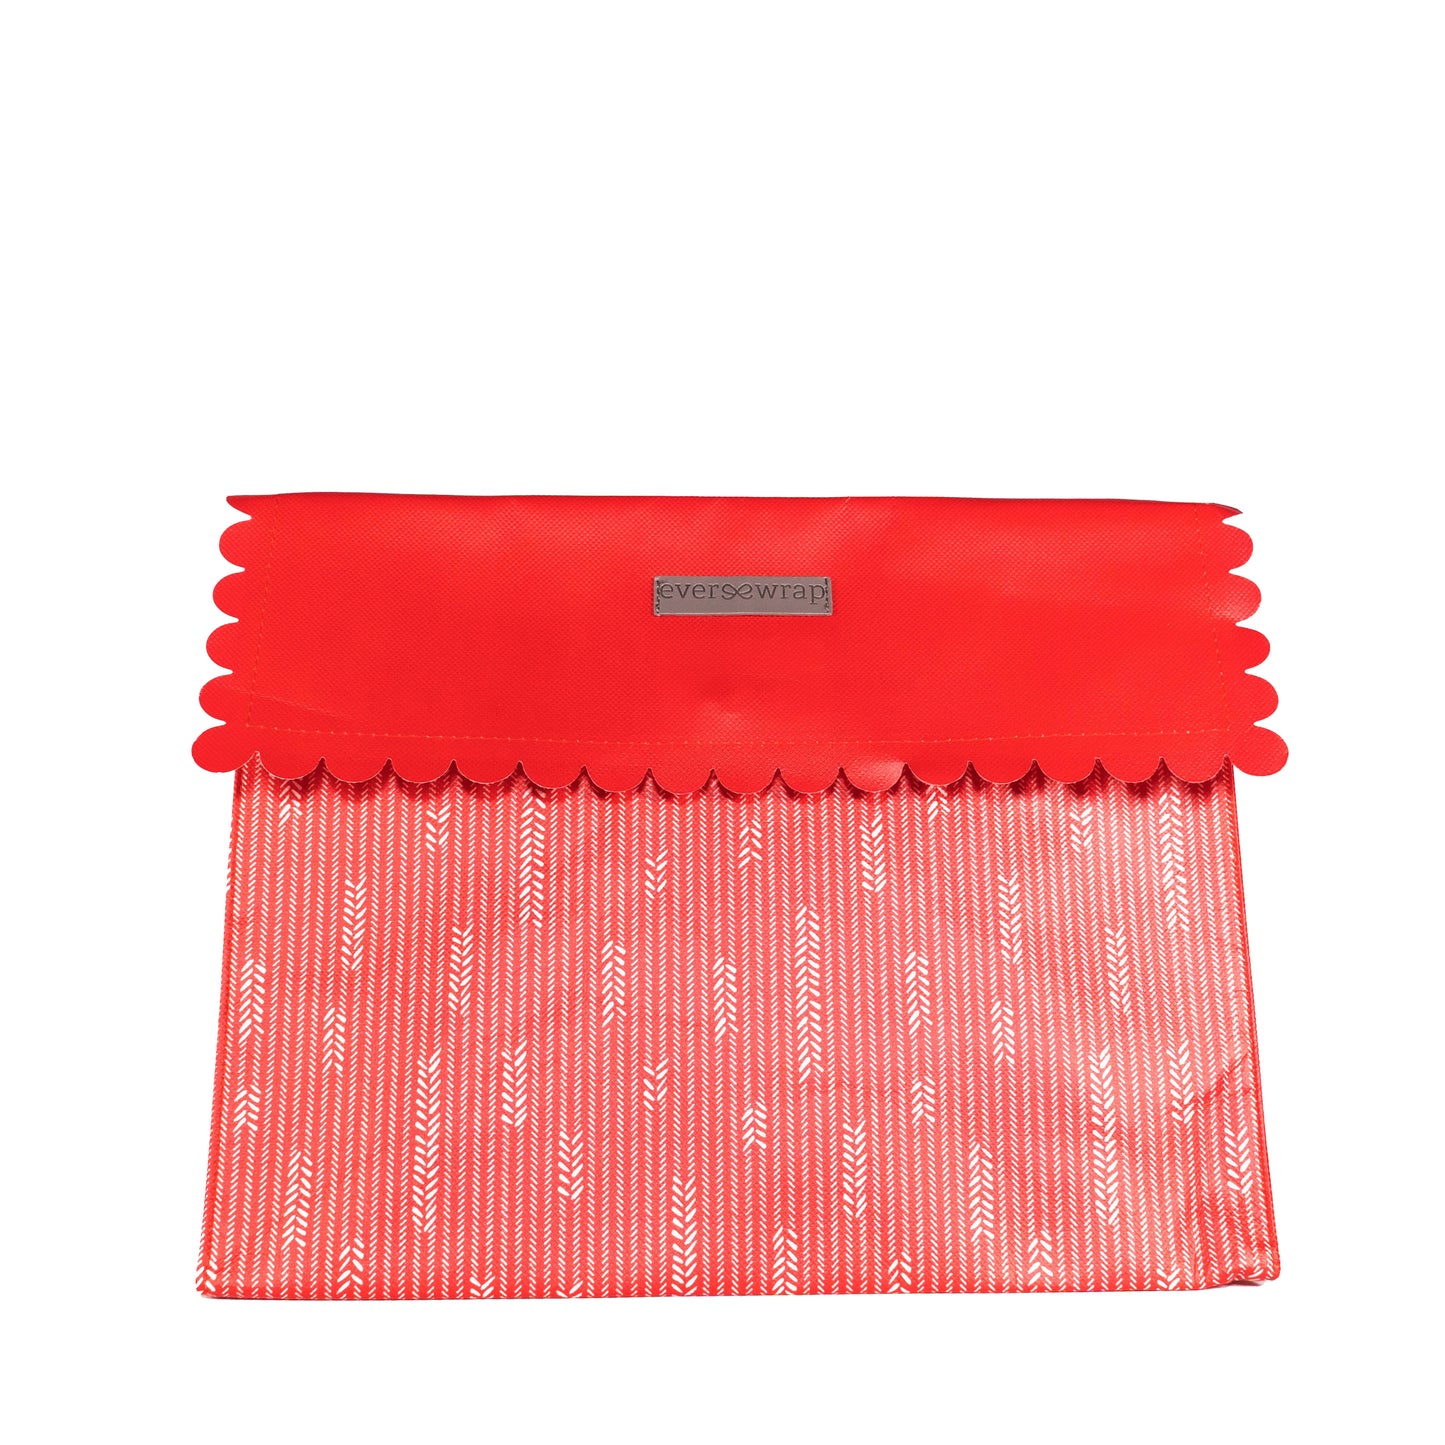 IRREGULAR - Medium Red Reusable gift bag with magnet closure and scalloped, heavy duty for maximum reusability - EverWrap